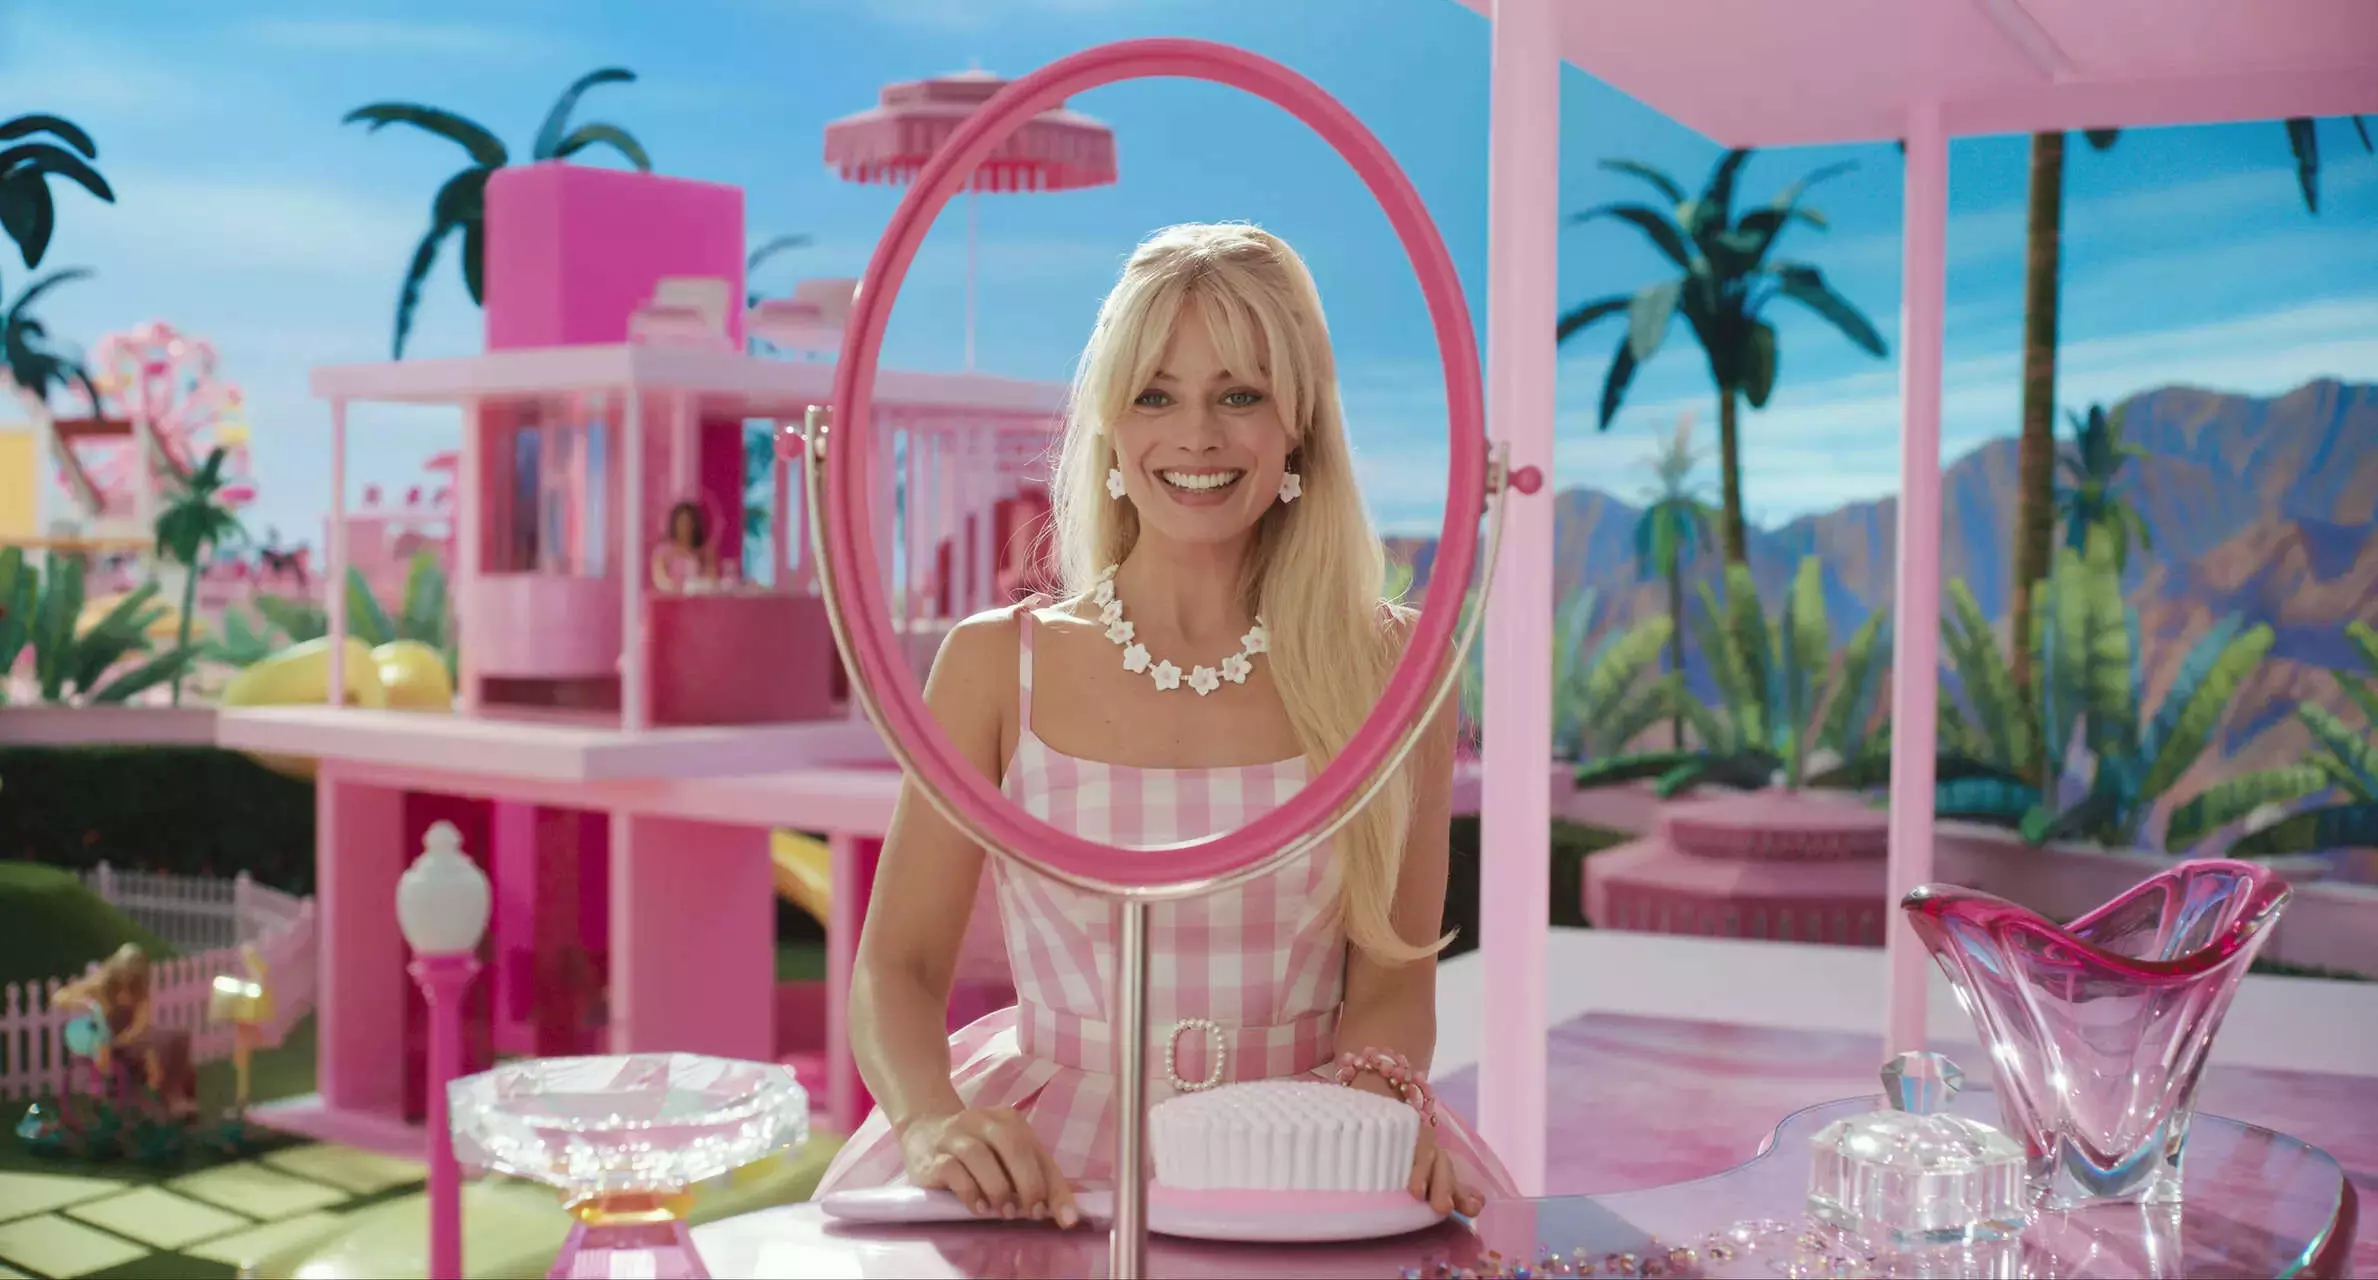 Barbie box office day 3 collection: Margot Robbie film shows little growth, earns Rs.18.5 cr in India during 1st weekend